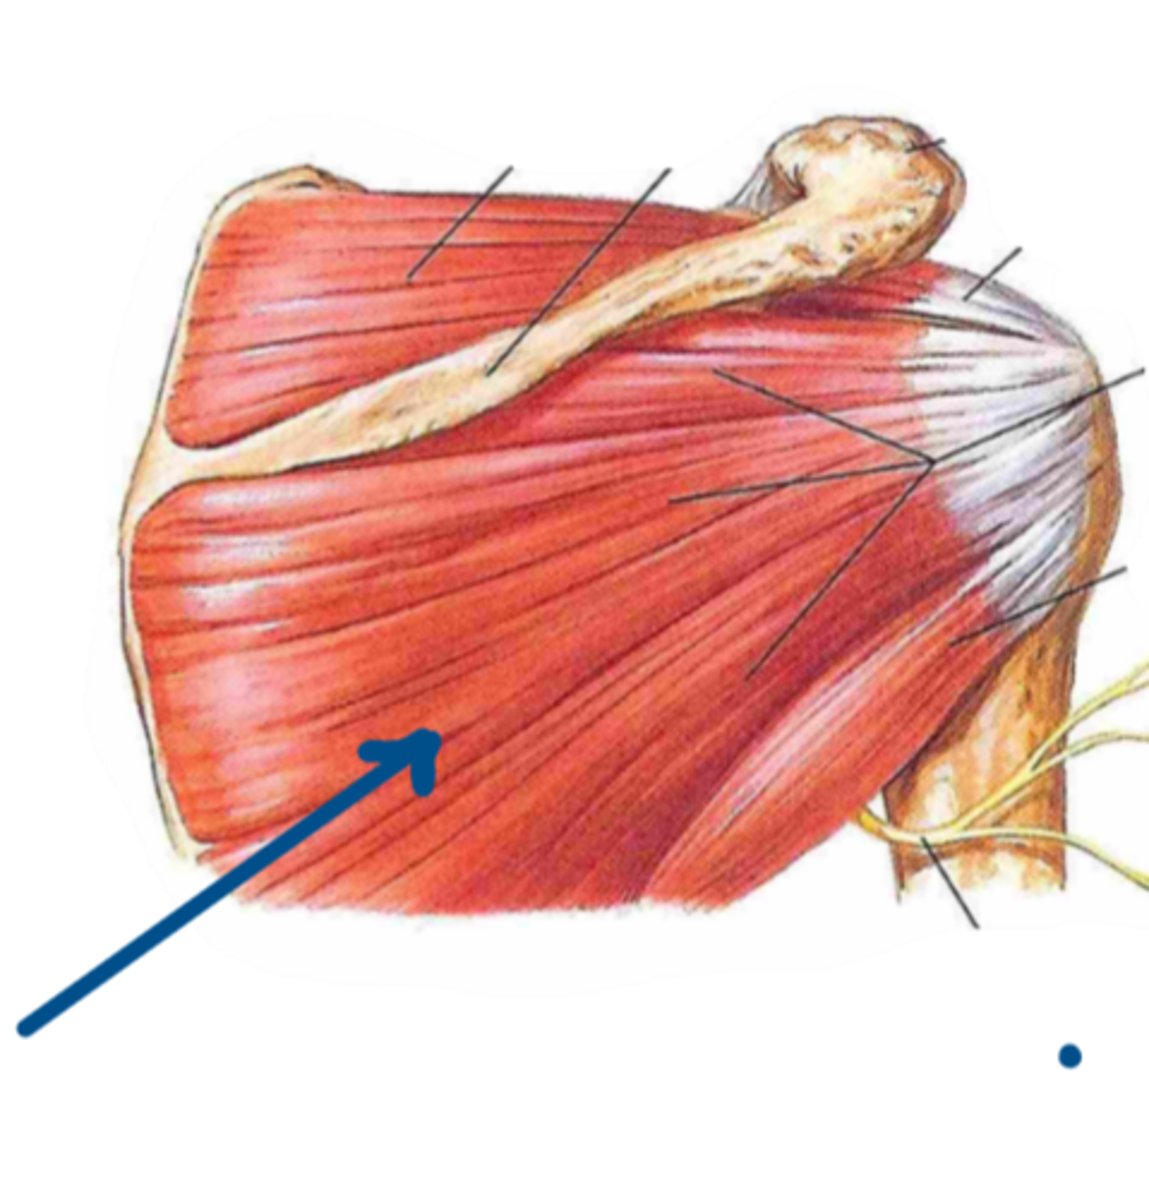 <p>Identify the innervation of the structure indicated by the arrow</p>